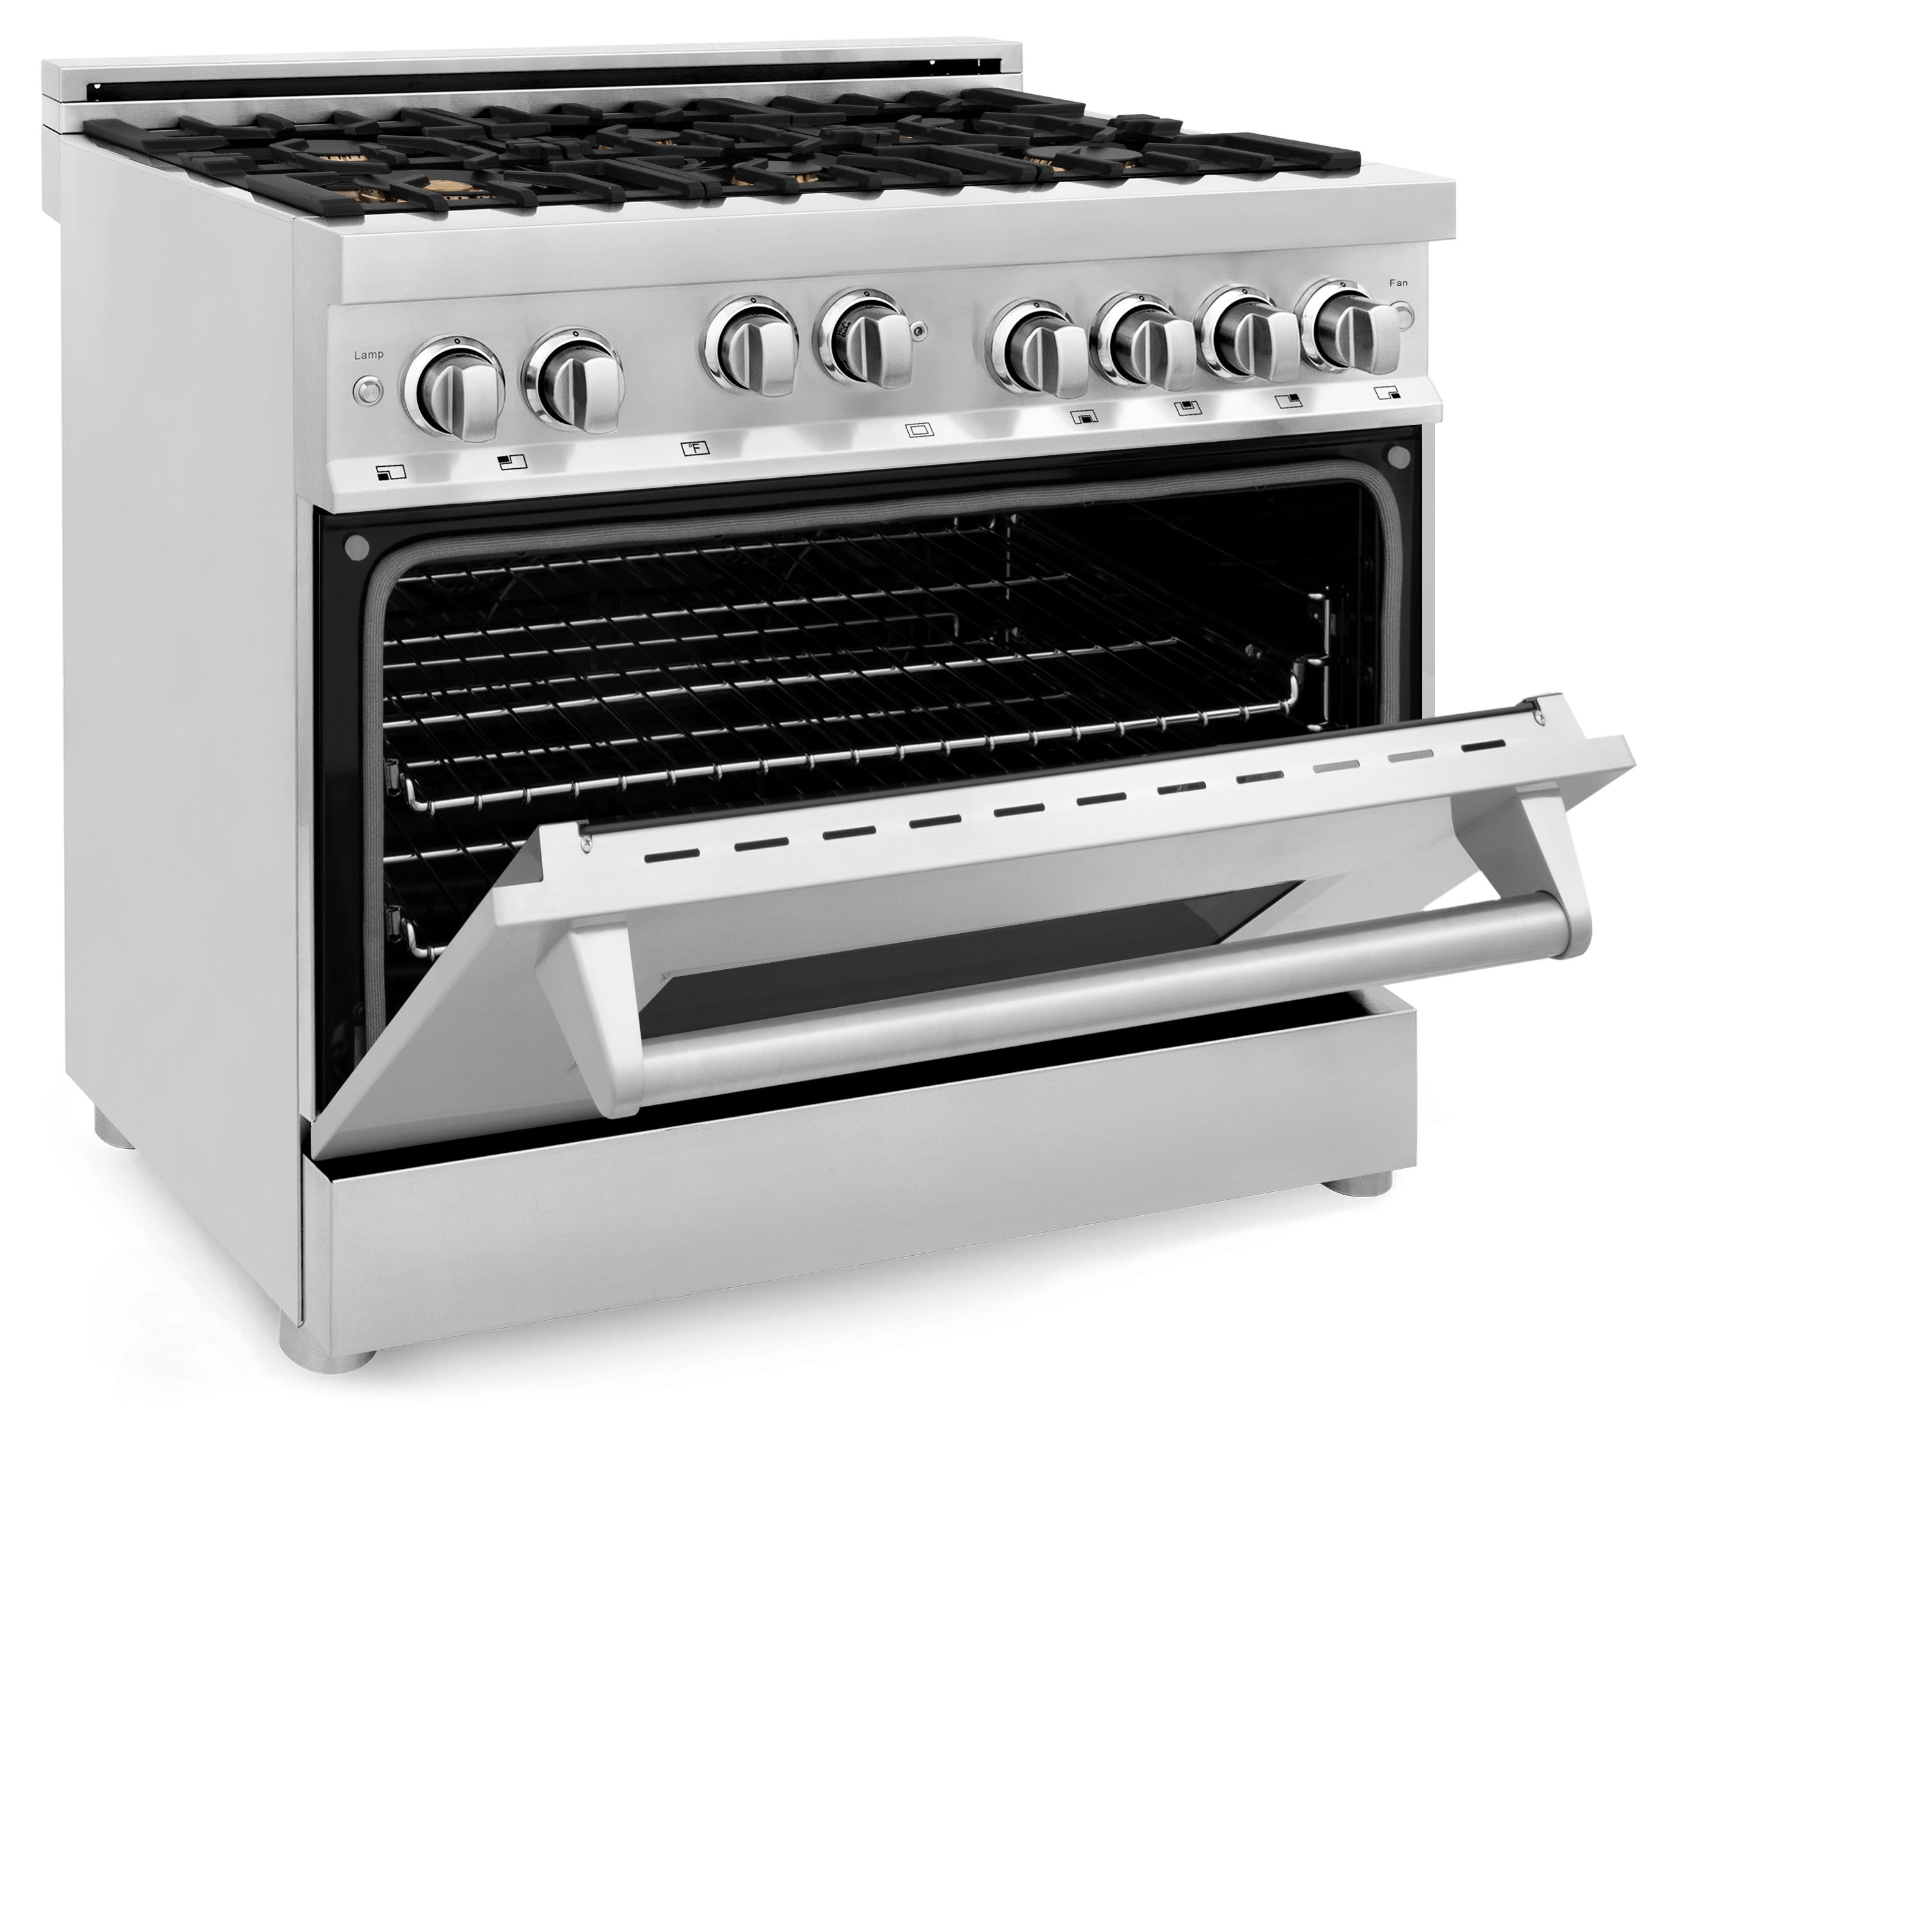 ZLINE 36 in. Professional 4.6 cu. ft. Gas on Gas Range in Stainless Steel with Color Door Options (RG36)